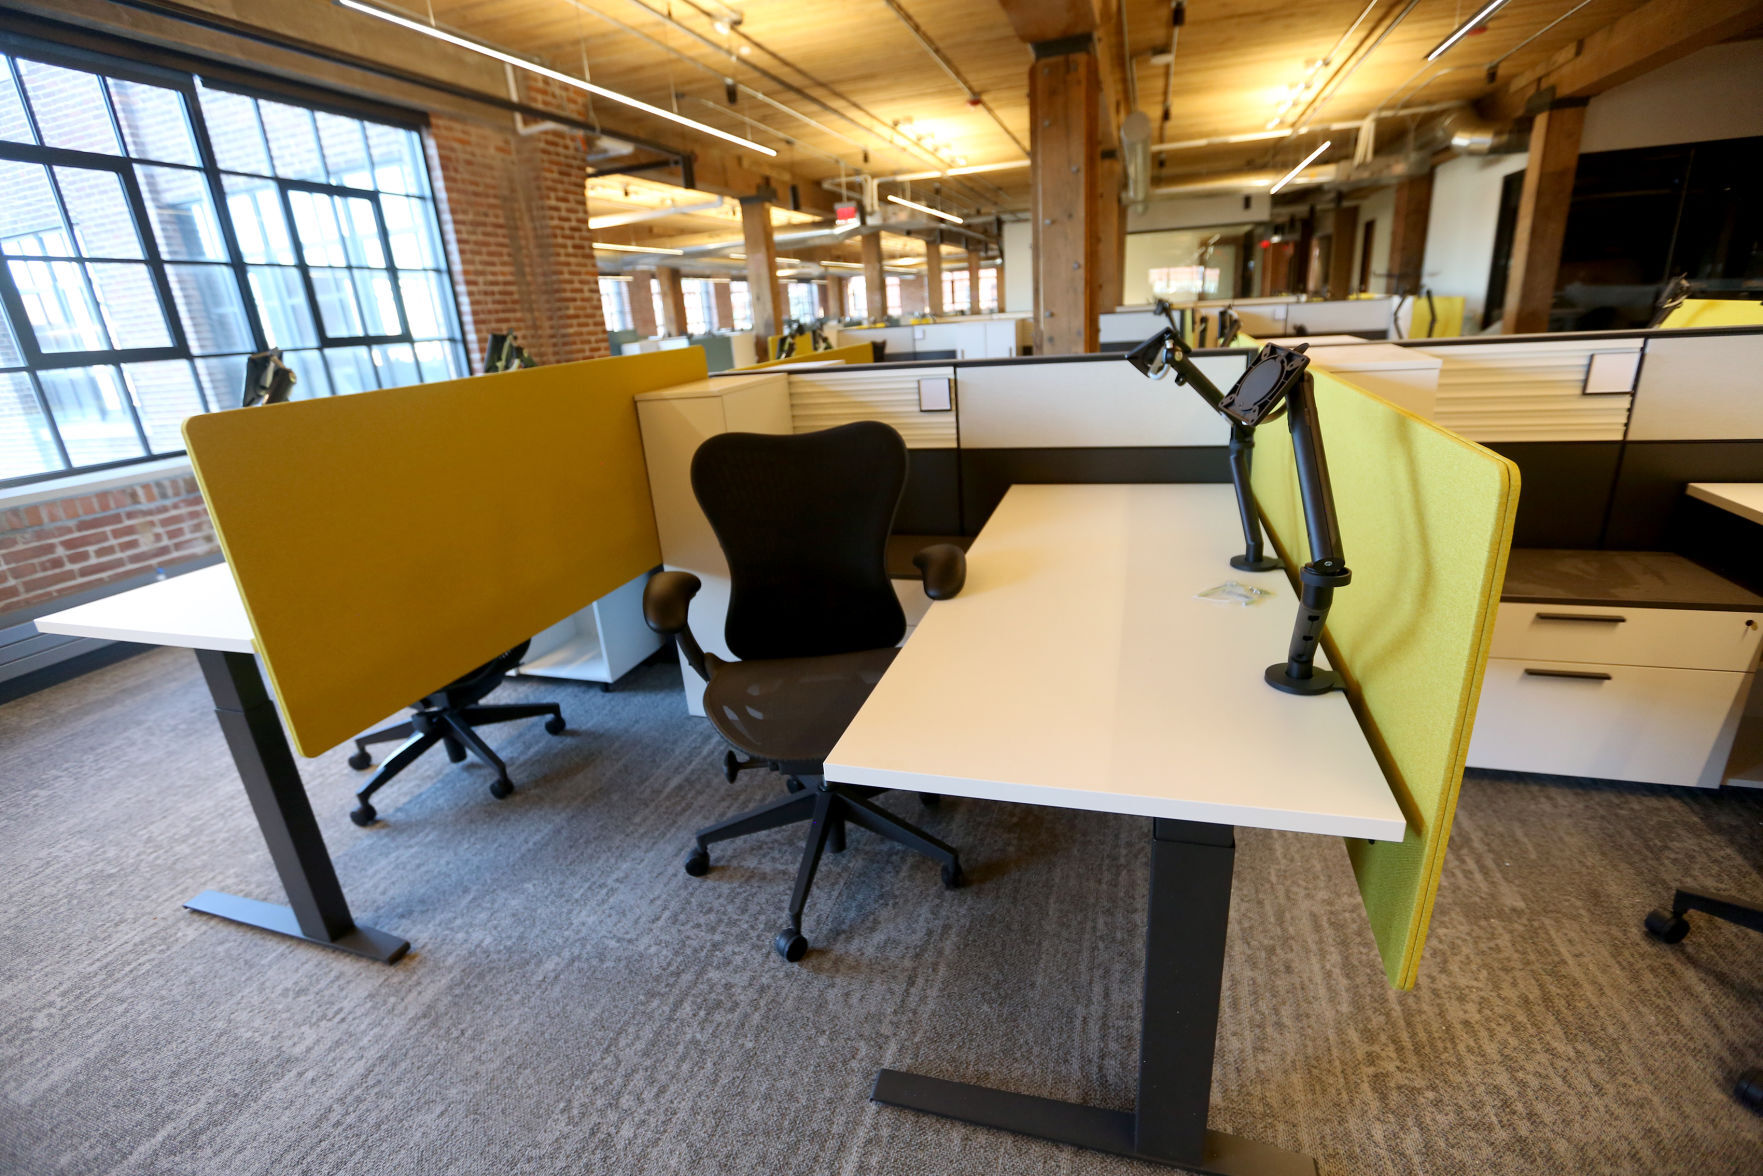 New office space at the Dupaco Voices Building in Dubuque on Wednesday, Nov. 4, 2020. PHOTO CREDIT: JESSICA REILLY